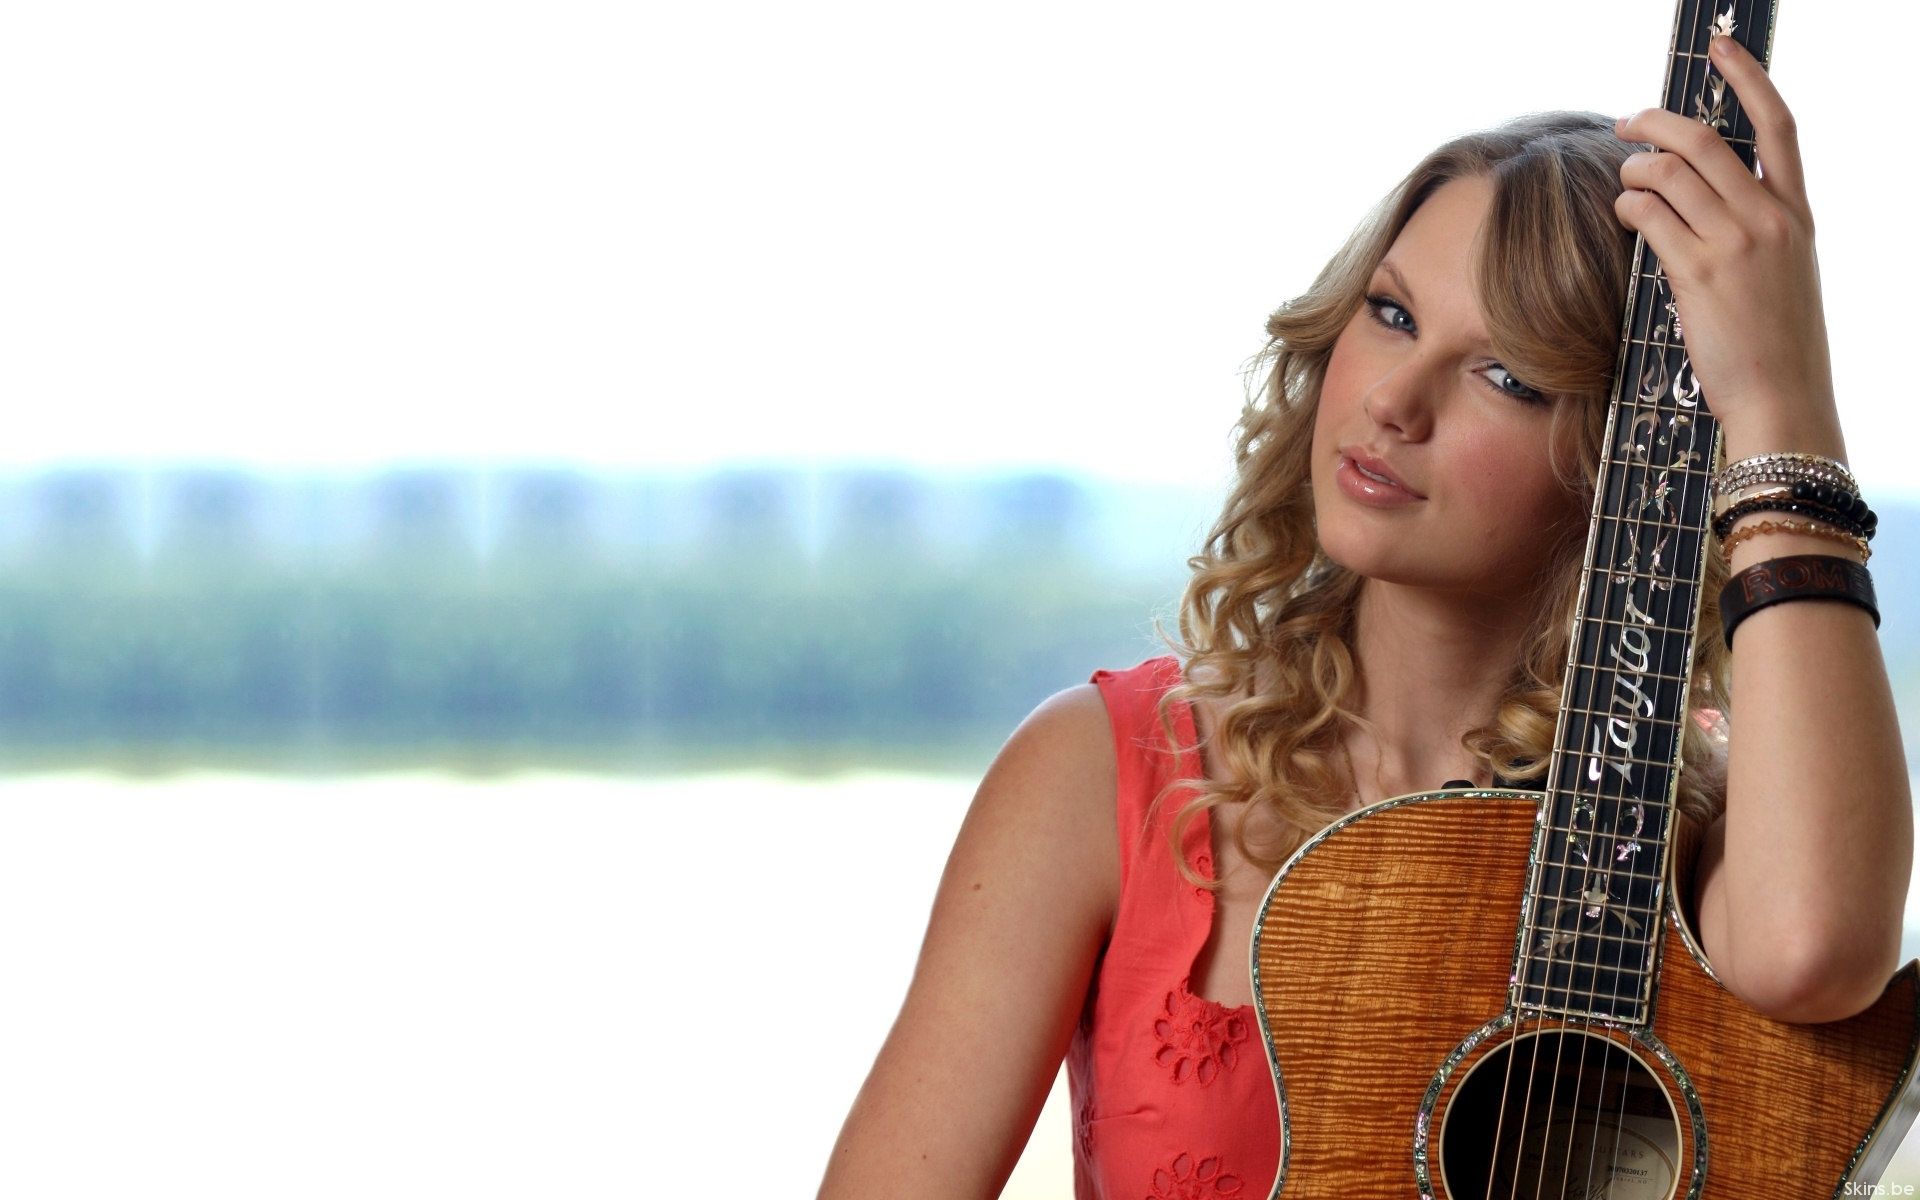 blondes, women, music, Taylor Swift, Country, celebrity, singers